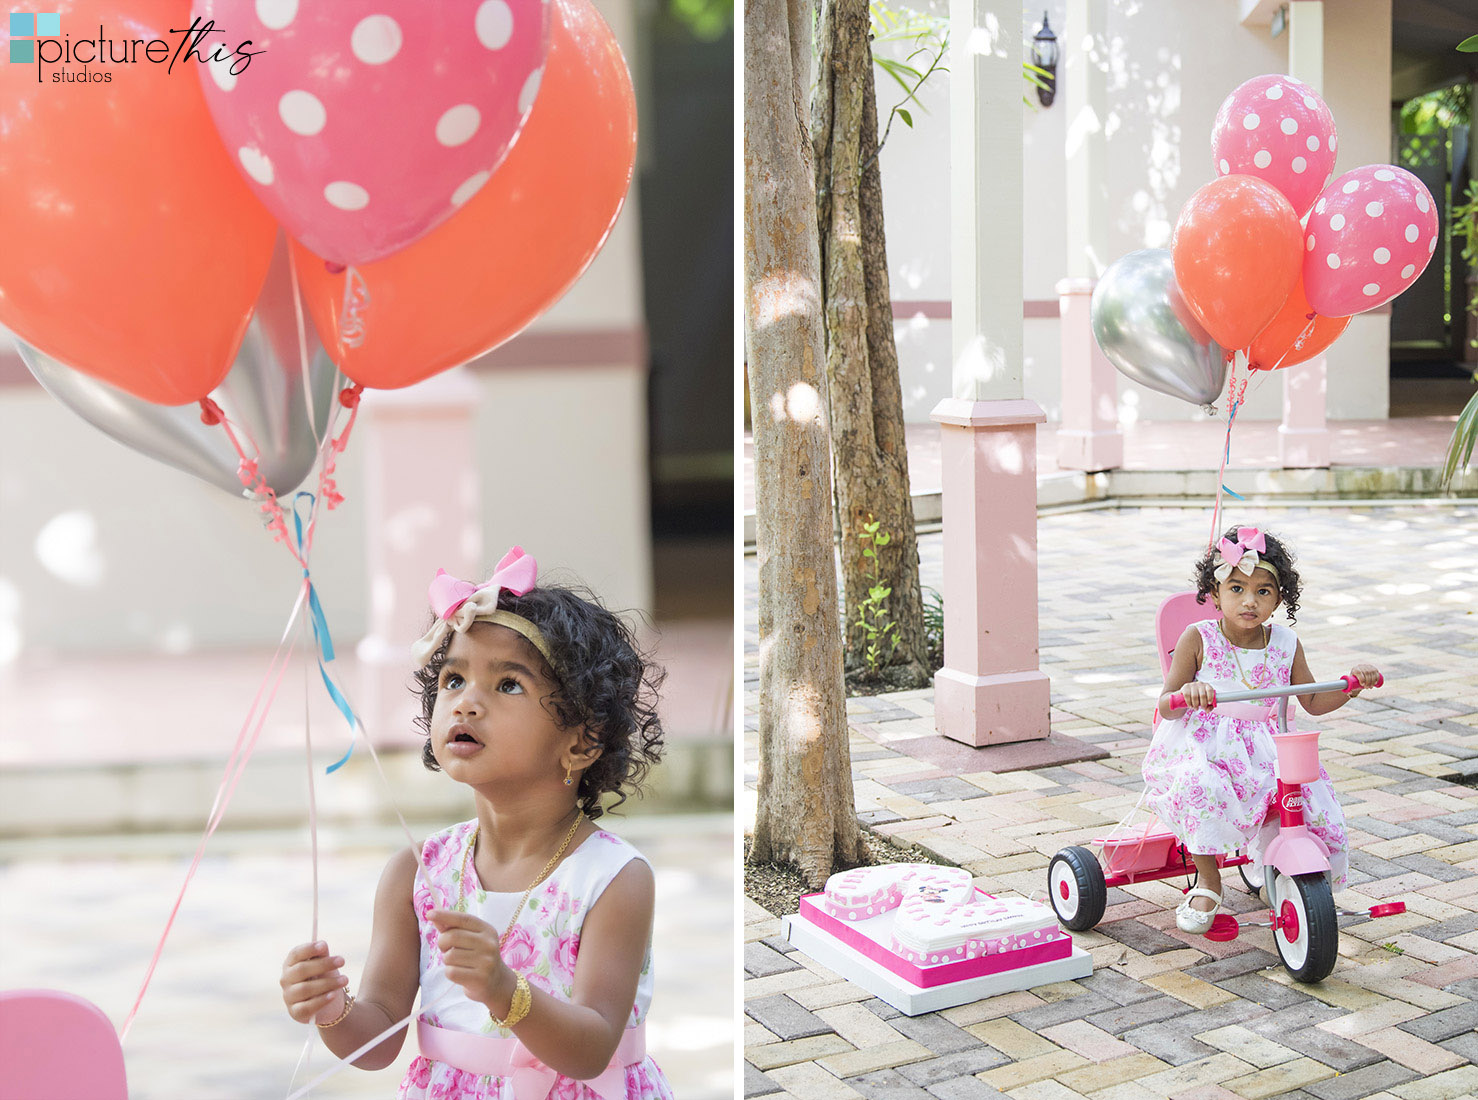 This beautiful little two year old celebrated with family portraits at The Cayman Islands Botanical Park by Heather Holt Photography with Picture This Studios